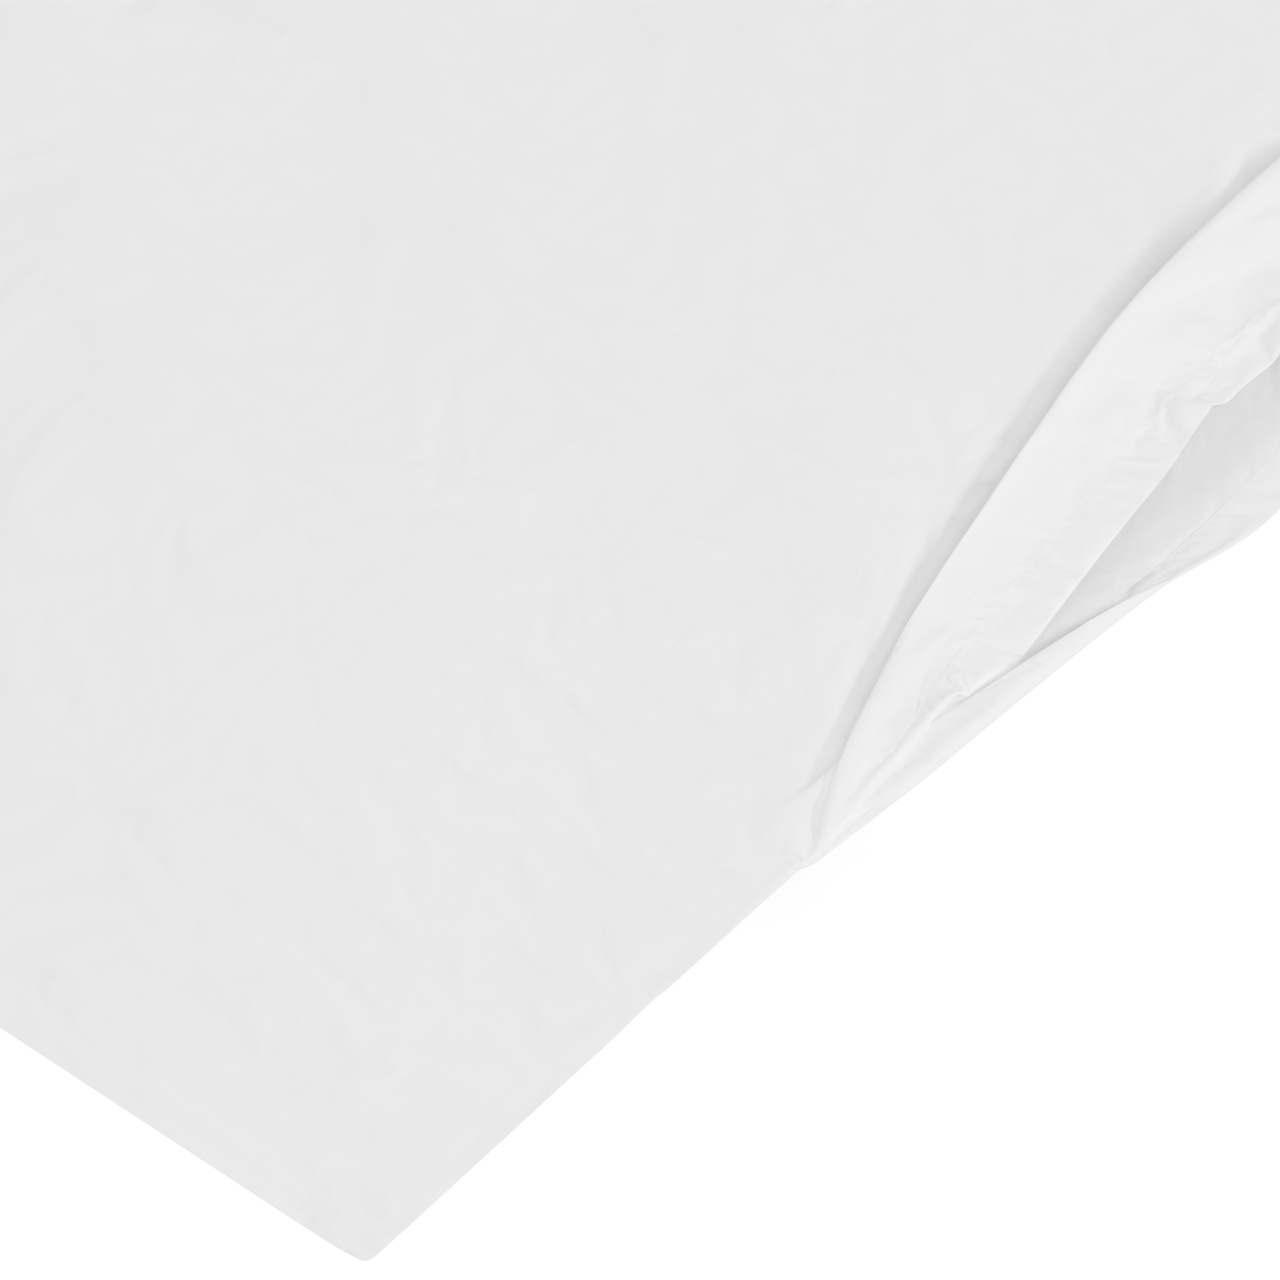 Duvet Selected by Bed & Bath 150x200 cm, White